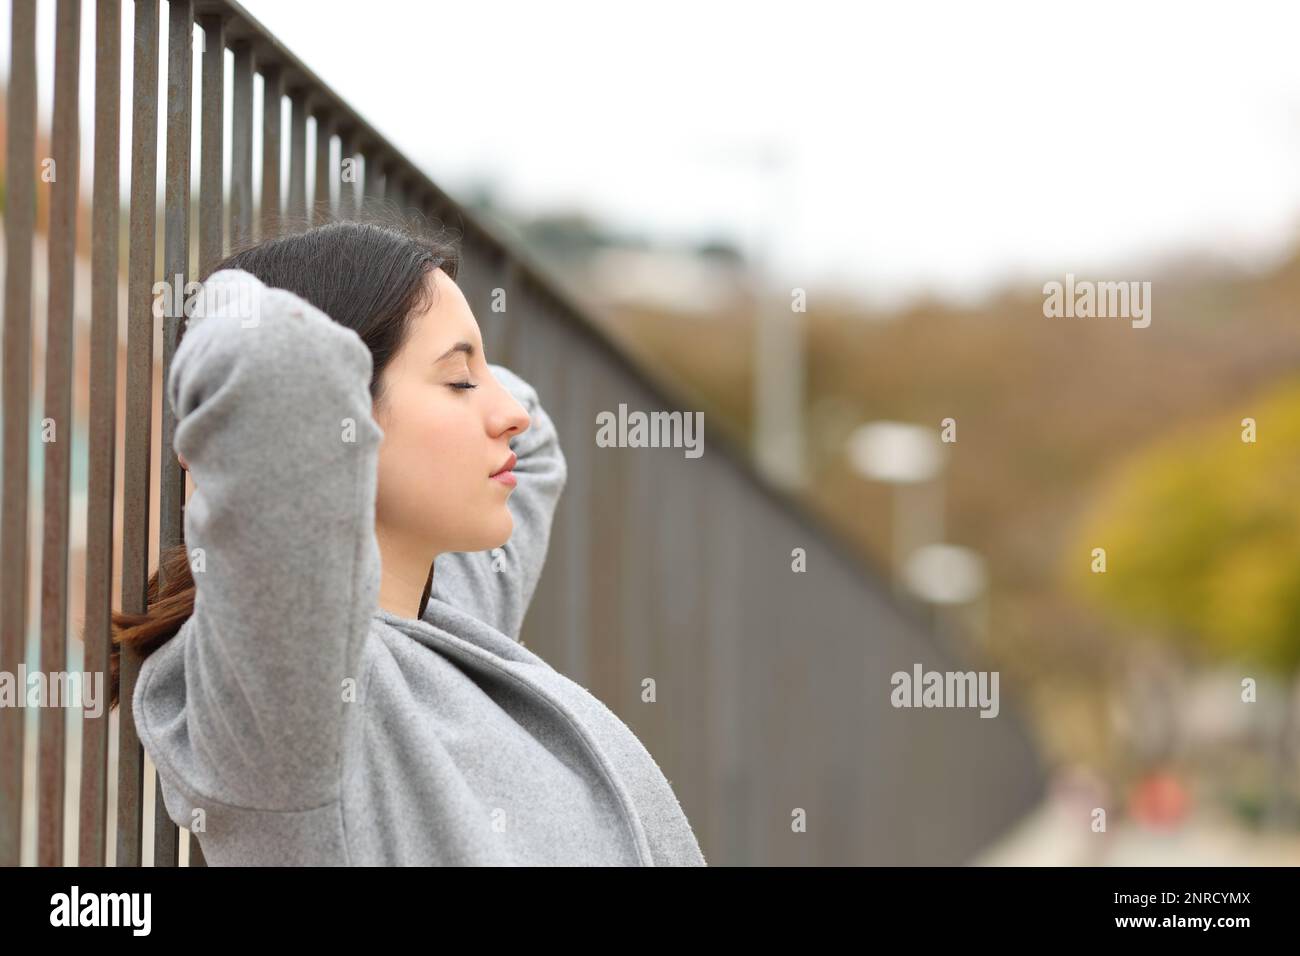 Profile of a woman resting and relaxing in the street Stock Photo